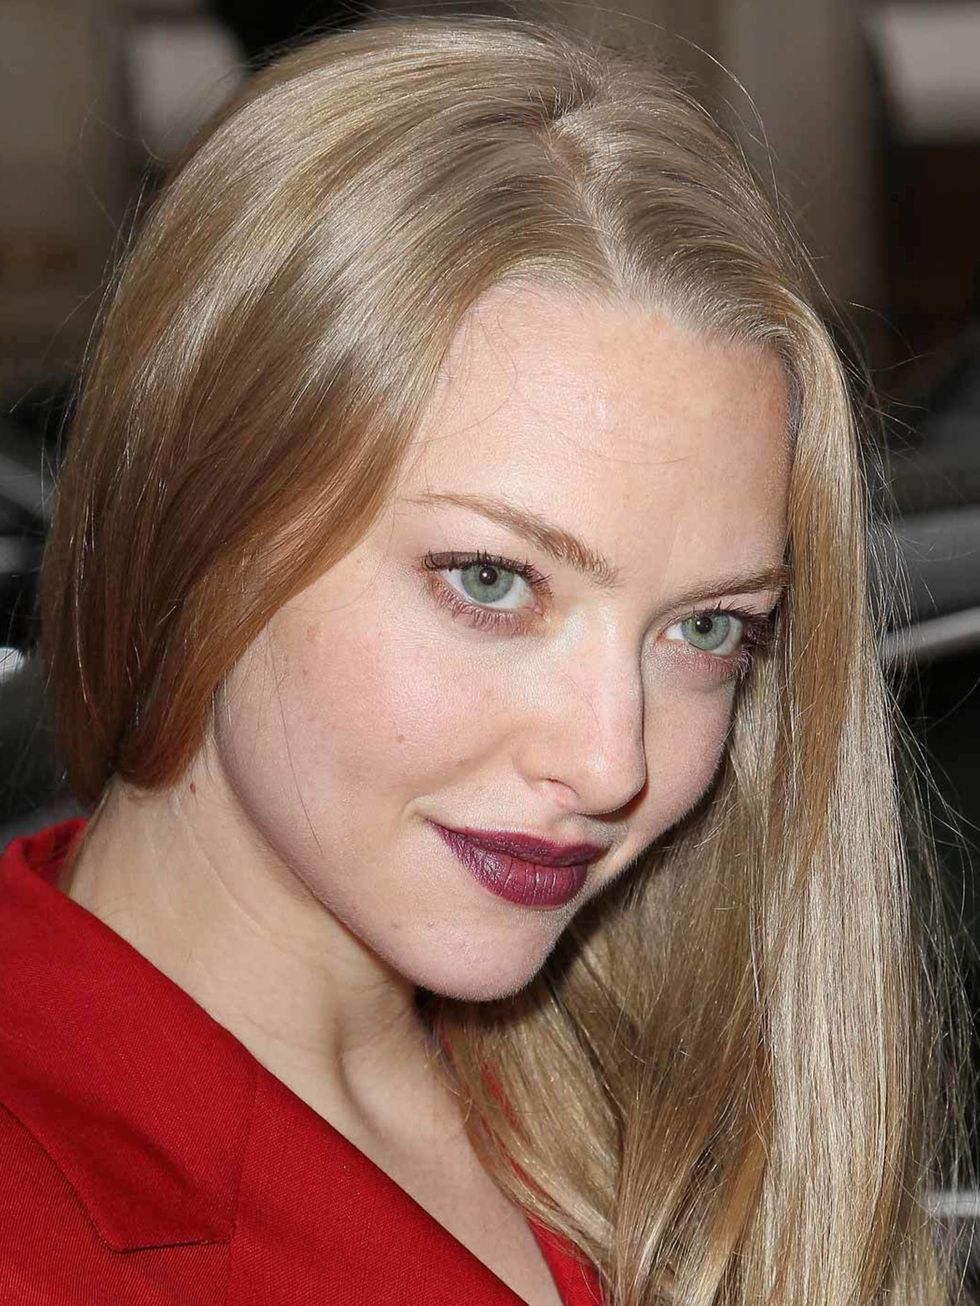 <p><strong>Amanda Seyfried</strong></p><p>Amanda Seyfried looked sultry and chic with her <a href="http://www.elleuk.com/elle-tv/beauty-school/beauty-school/beauty-school-romantic-goth">Romantic Goth</a> lip. The perfect red wine shade to complement her f